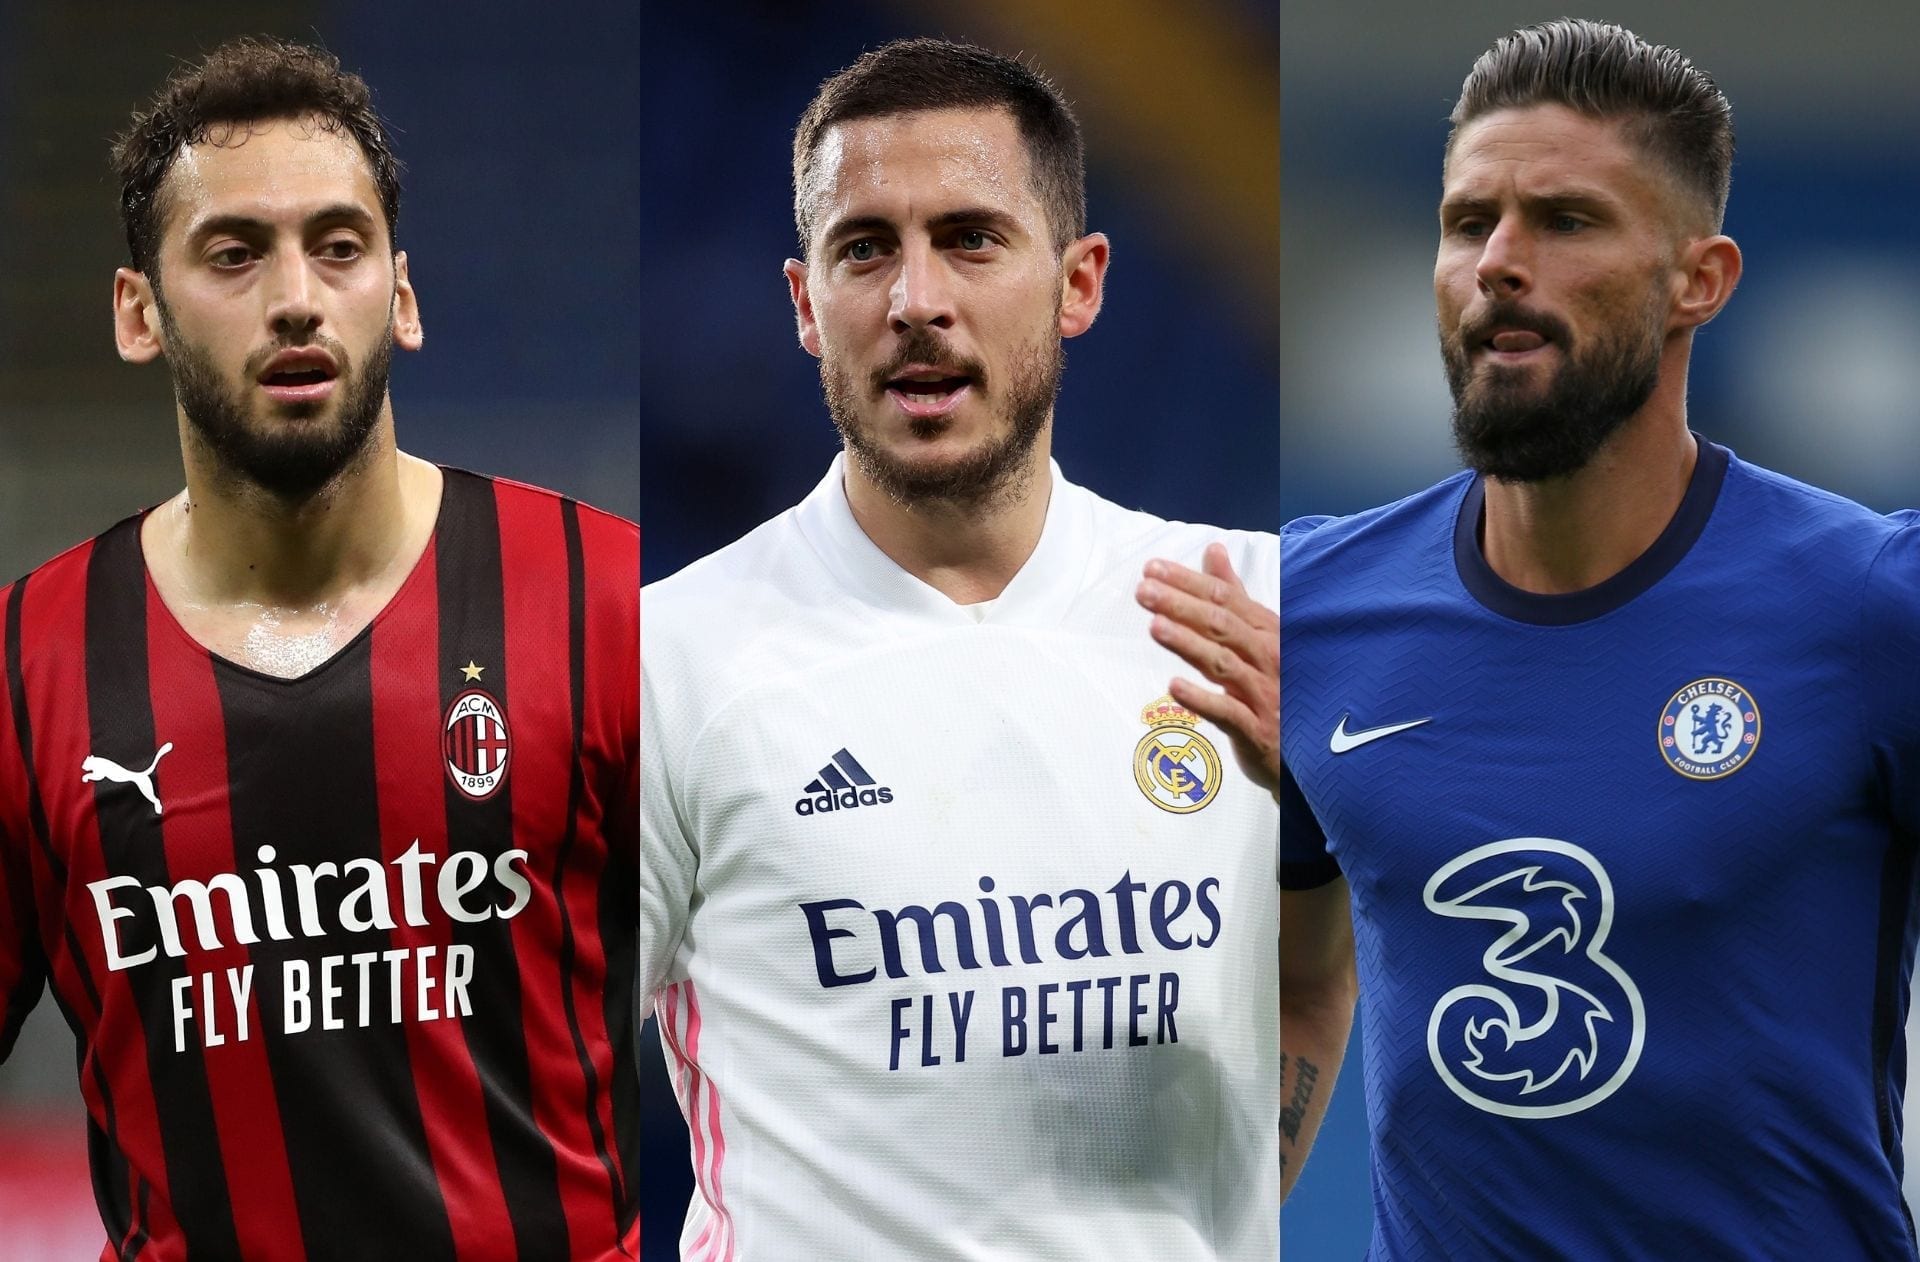 Tuesday's transfer rumors - AC Milan eye deals for 2 Chelsea players